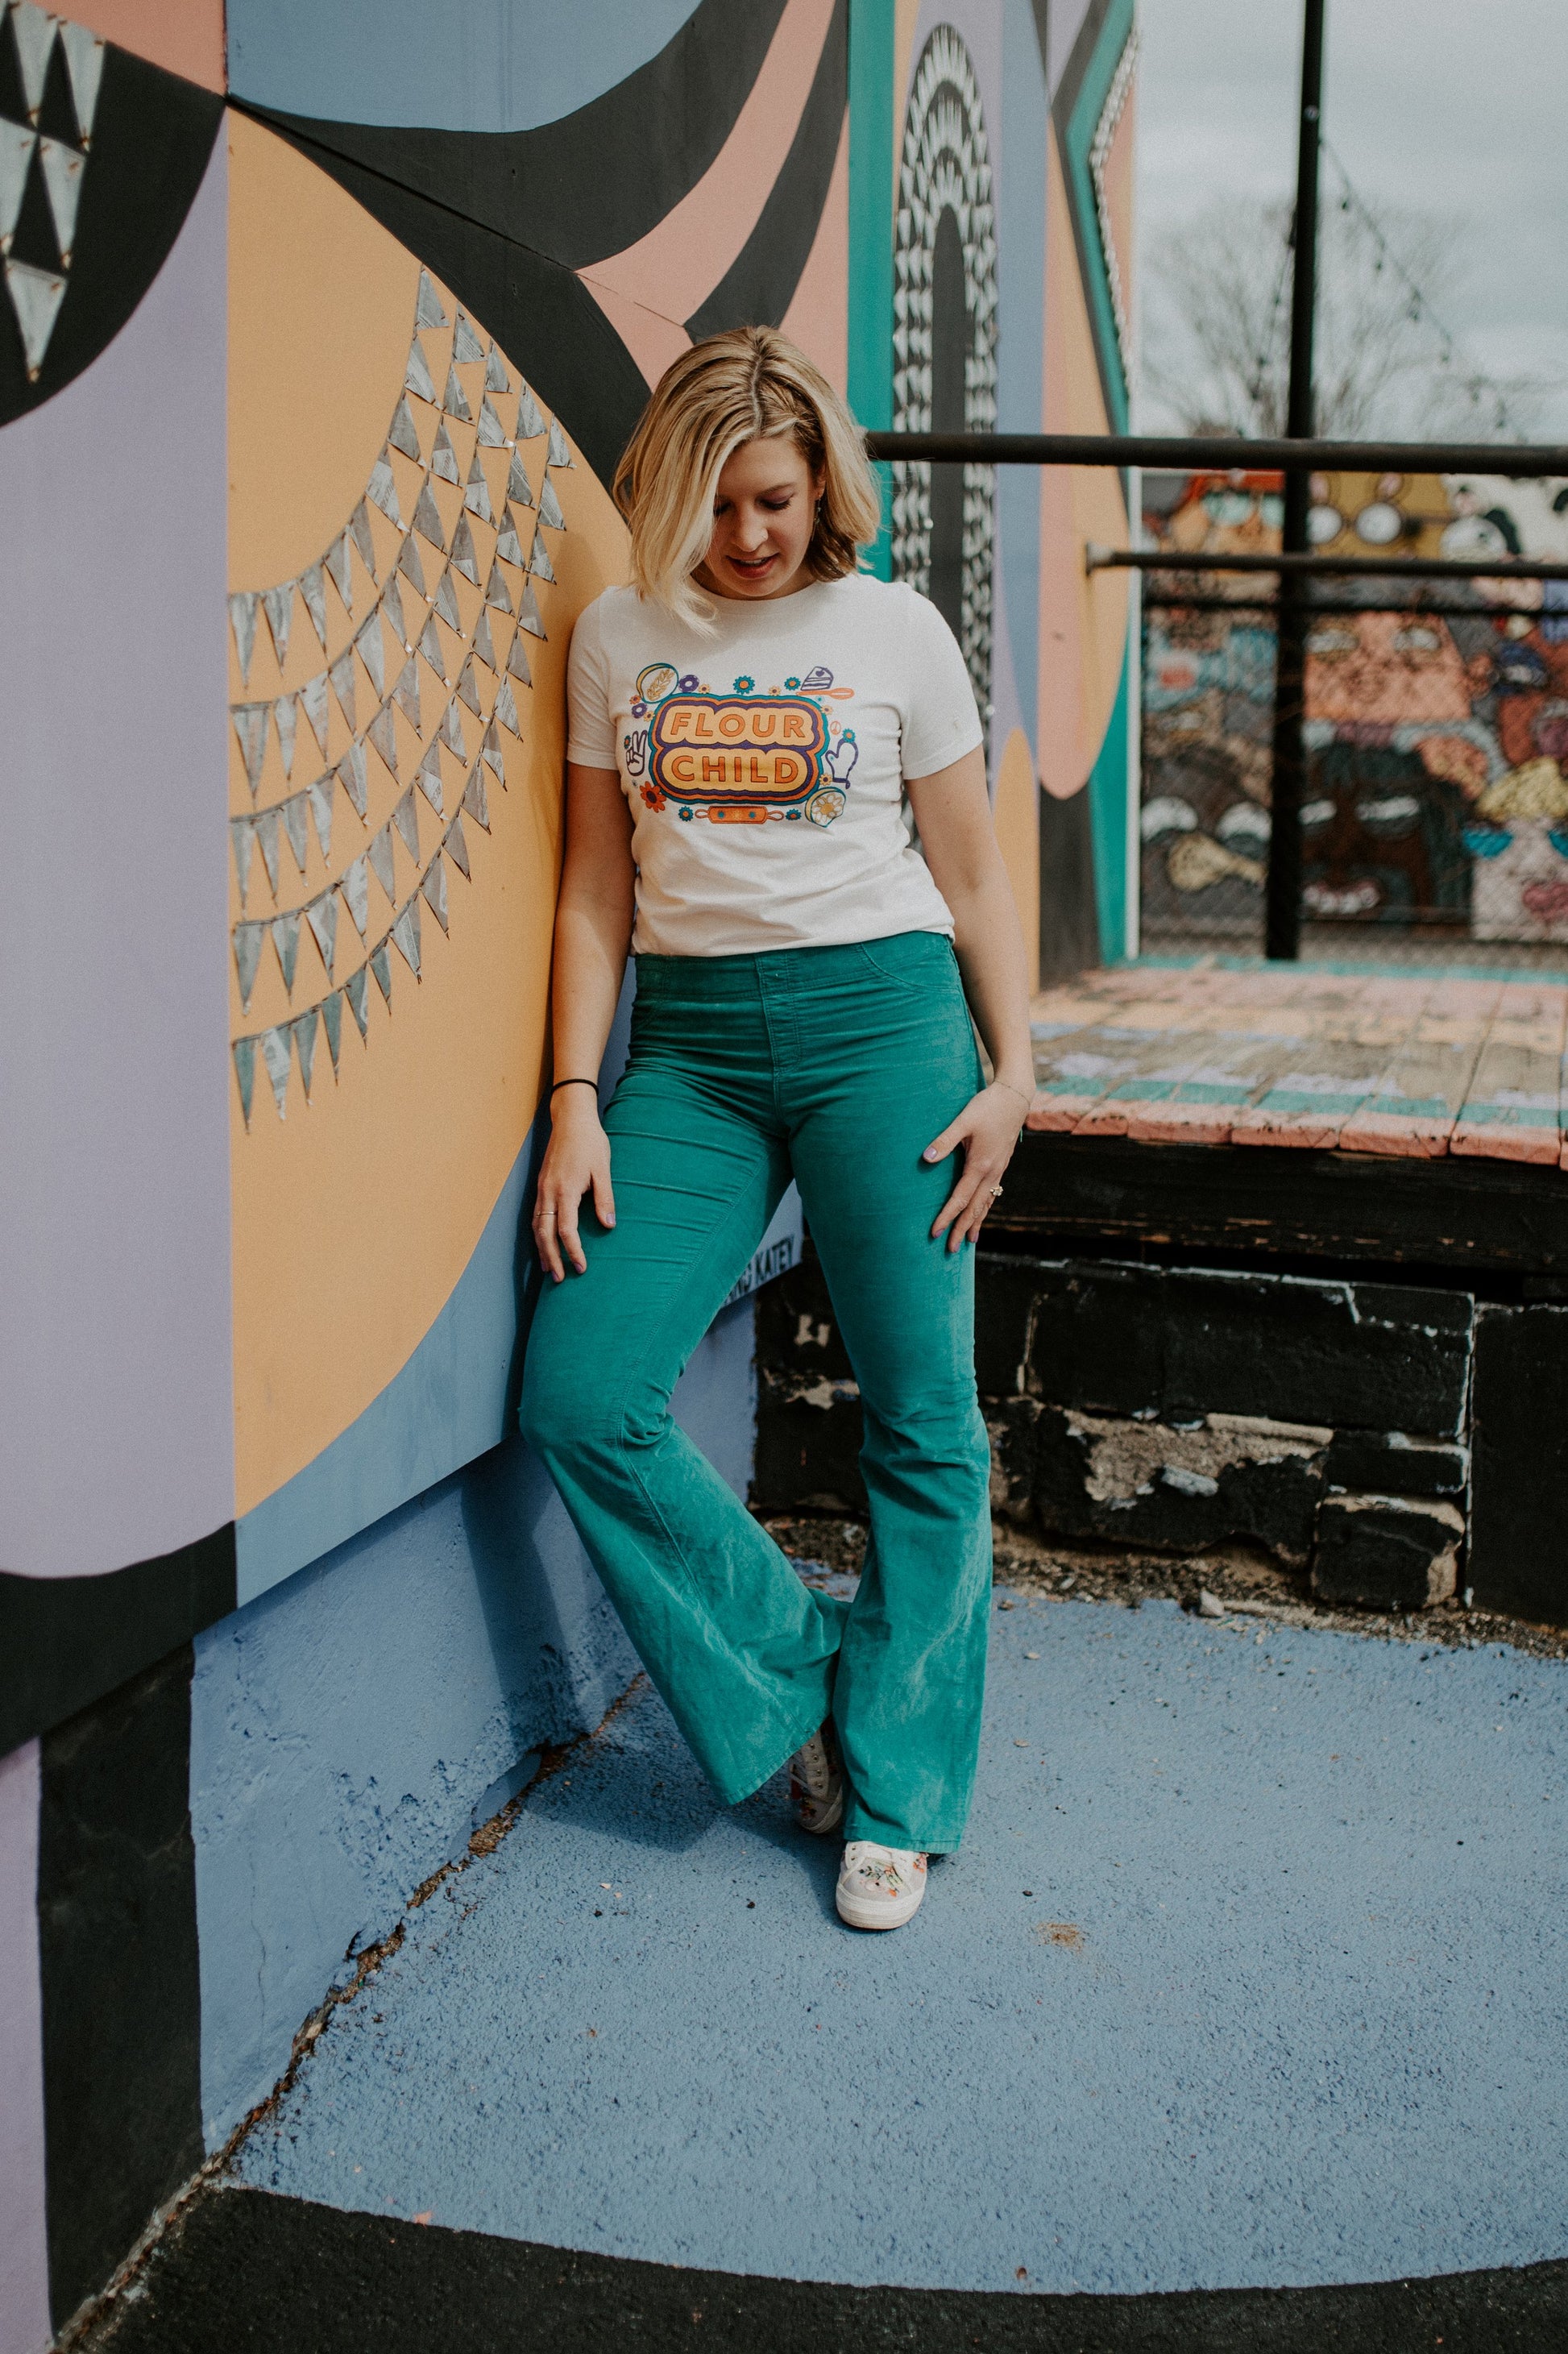 A woman in a white Flour Child tee and teal pants leans against a mural